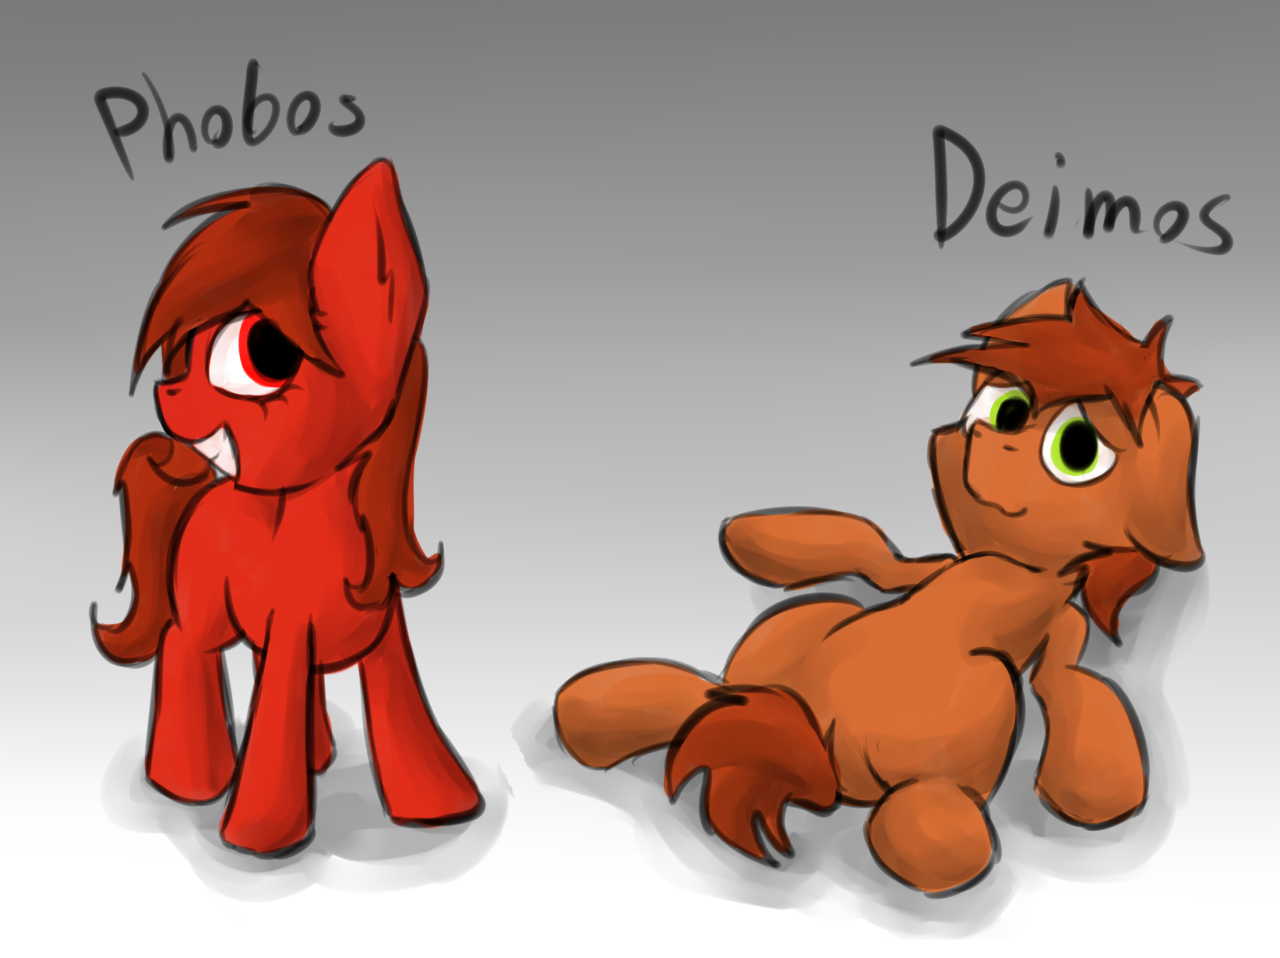 Equestria Daily - MLP Stuff!: Short Animation: Red Sus Amogus